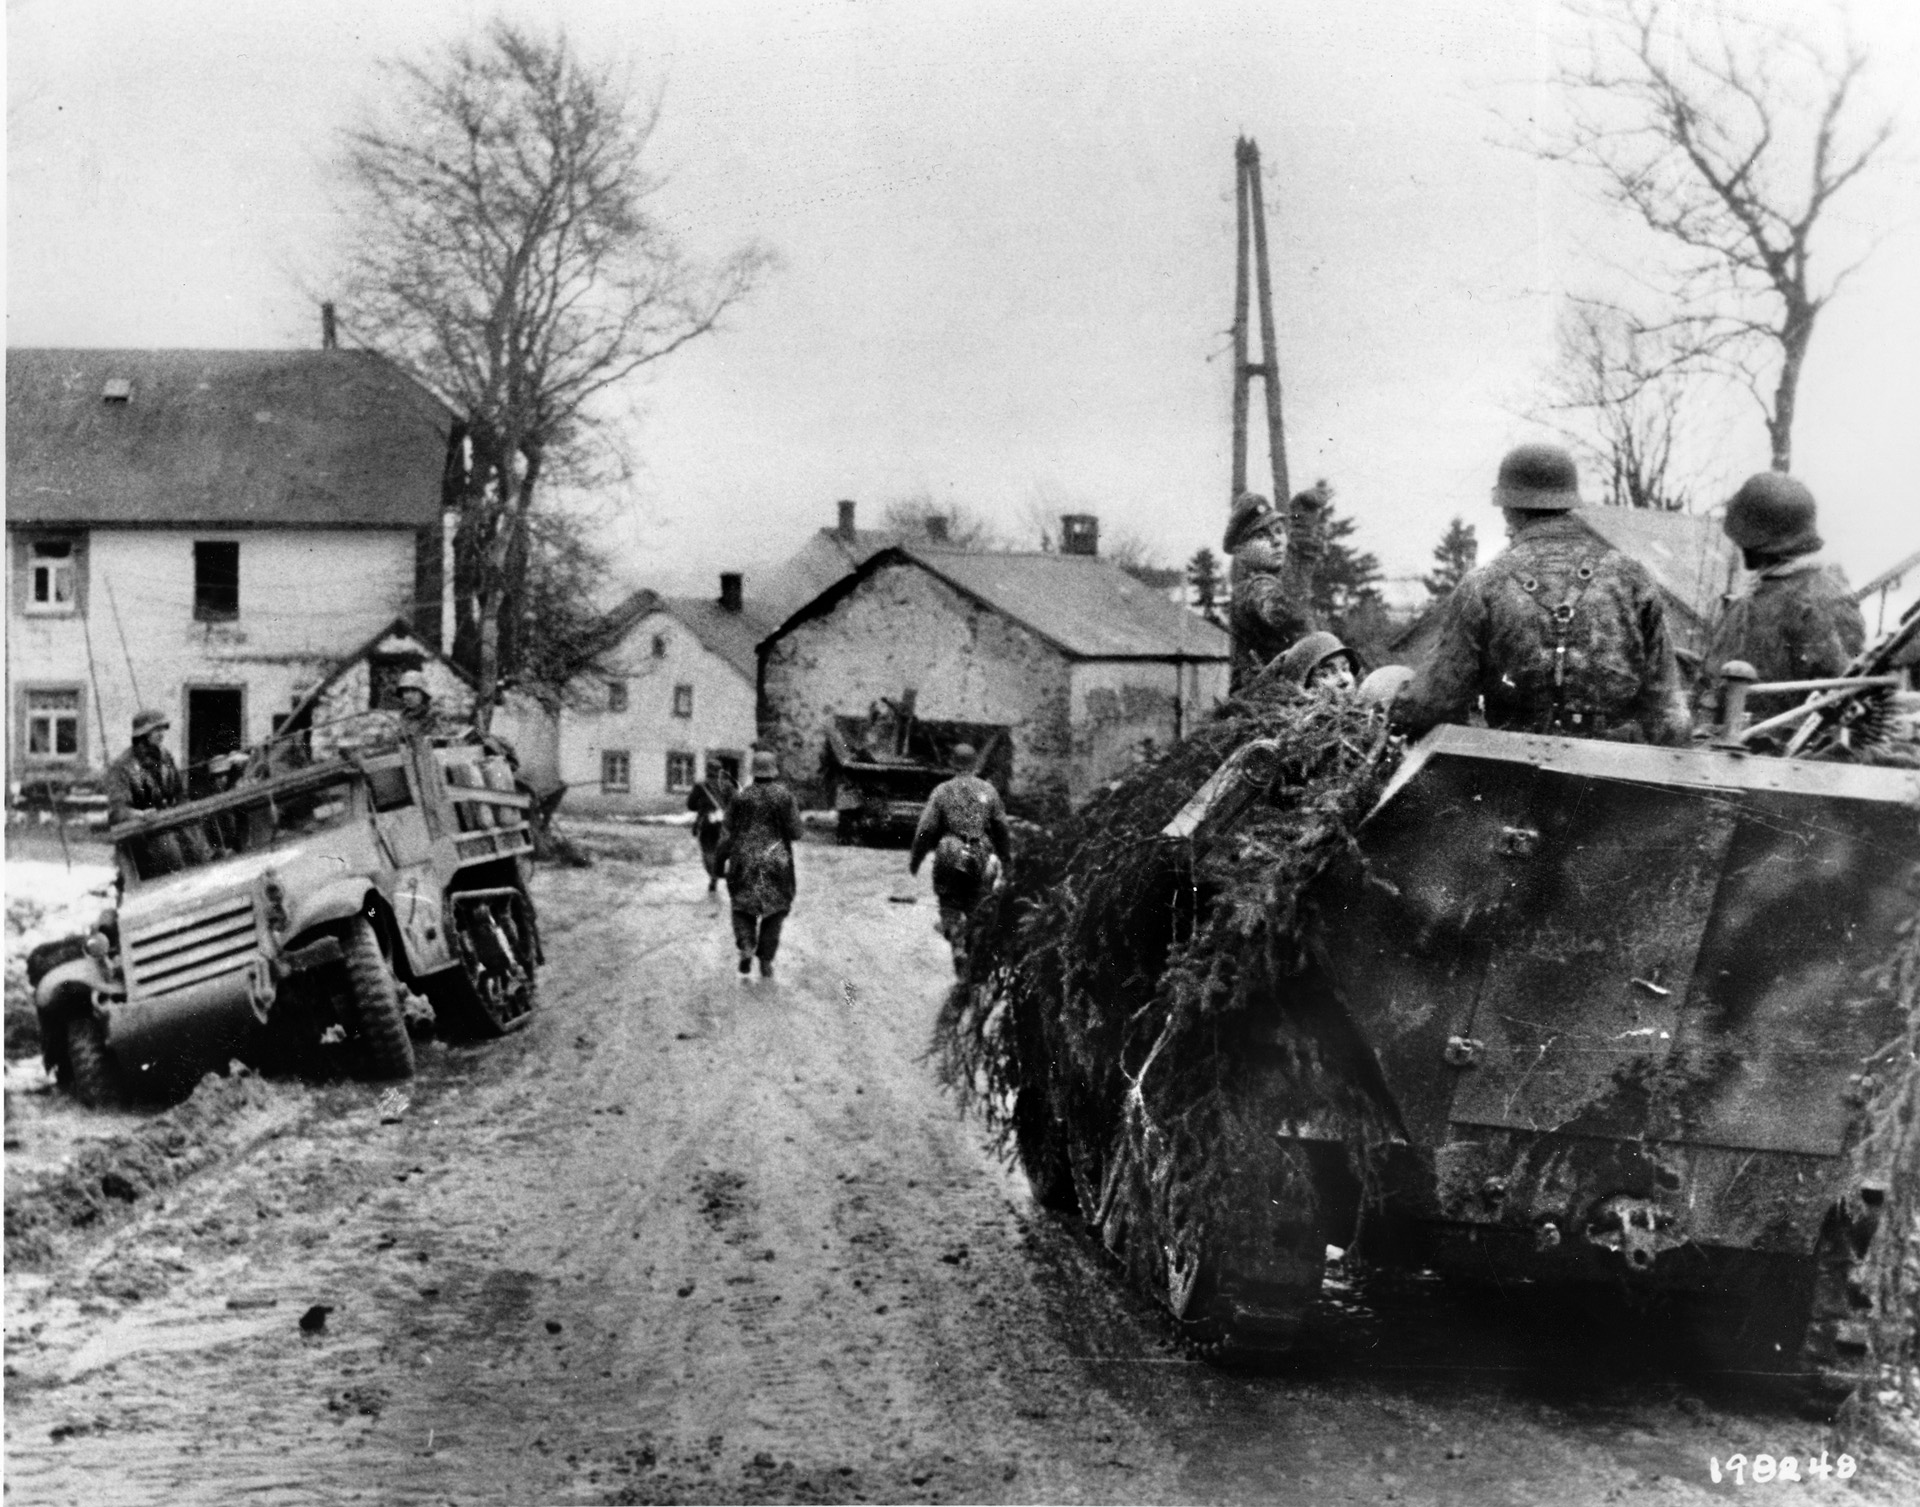 German soldiers enter a French village during the opening hours of the Ardennes Offensive of December 1944. Intelligence reports of a German buildup of men and materiel were virtually ignored by senior American commanders in the days leading up to the offensive.